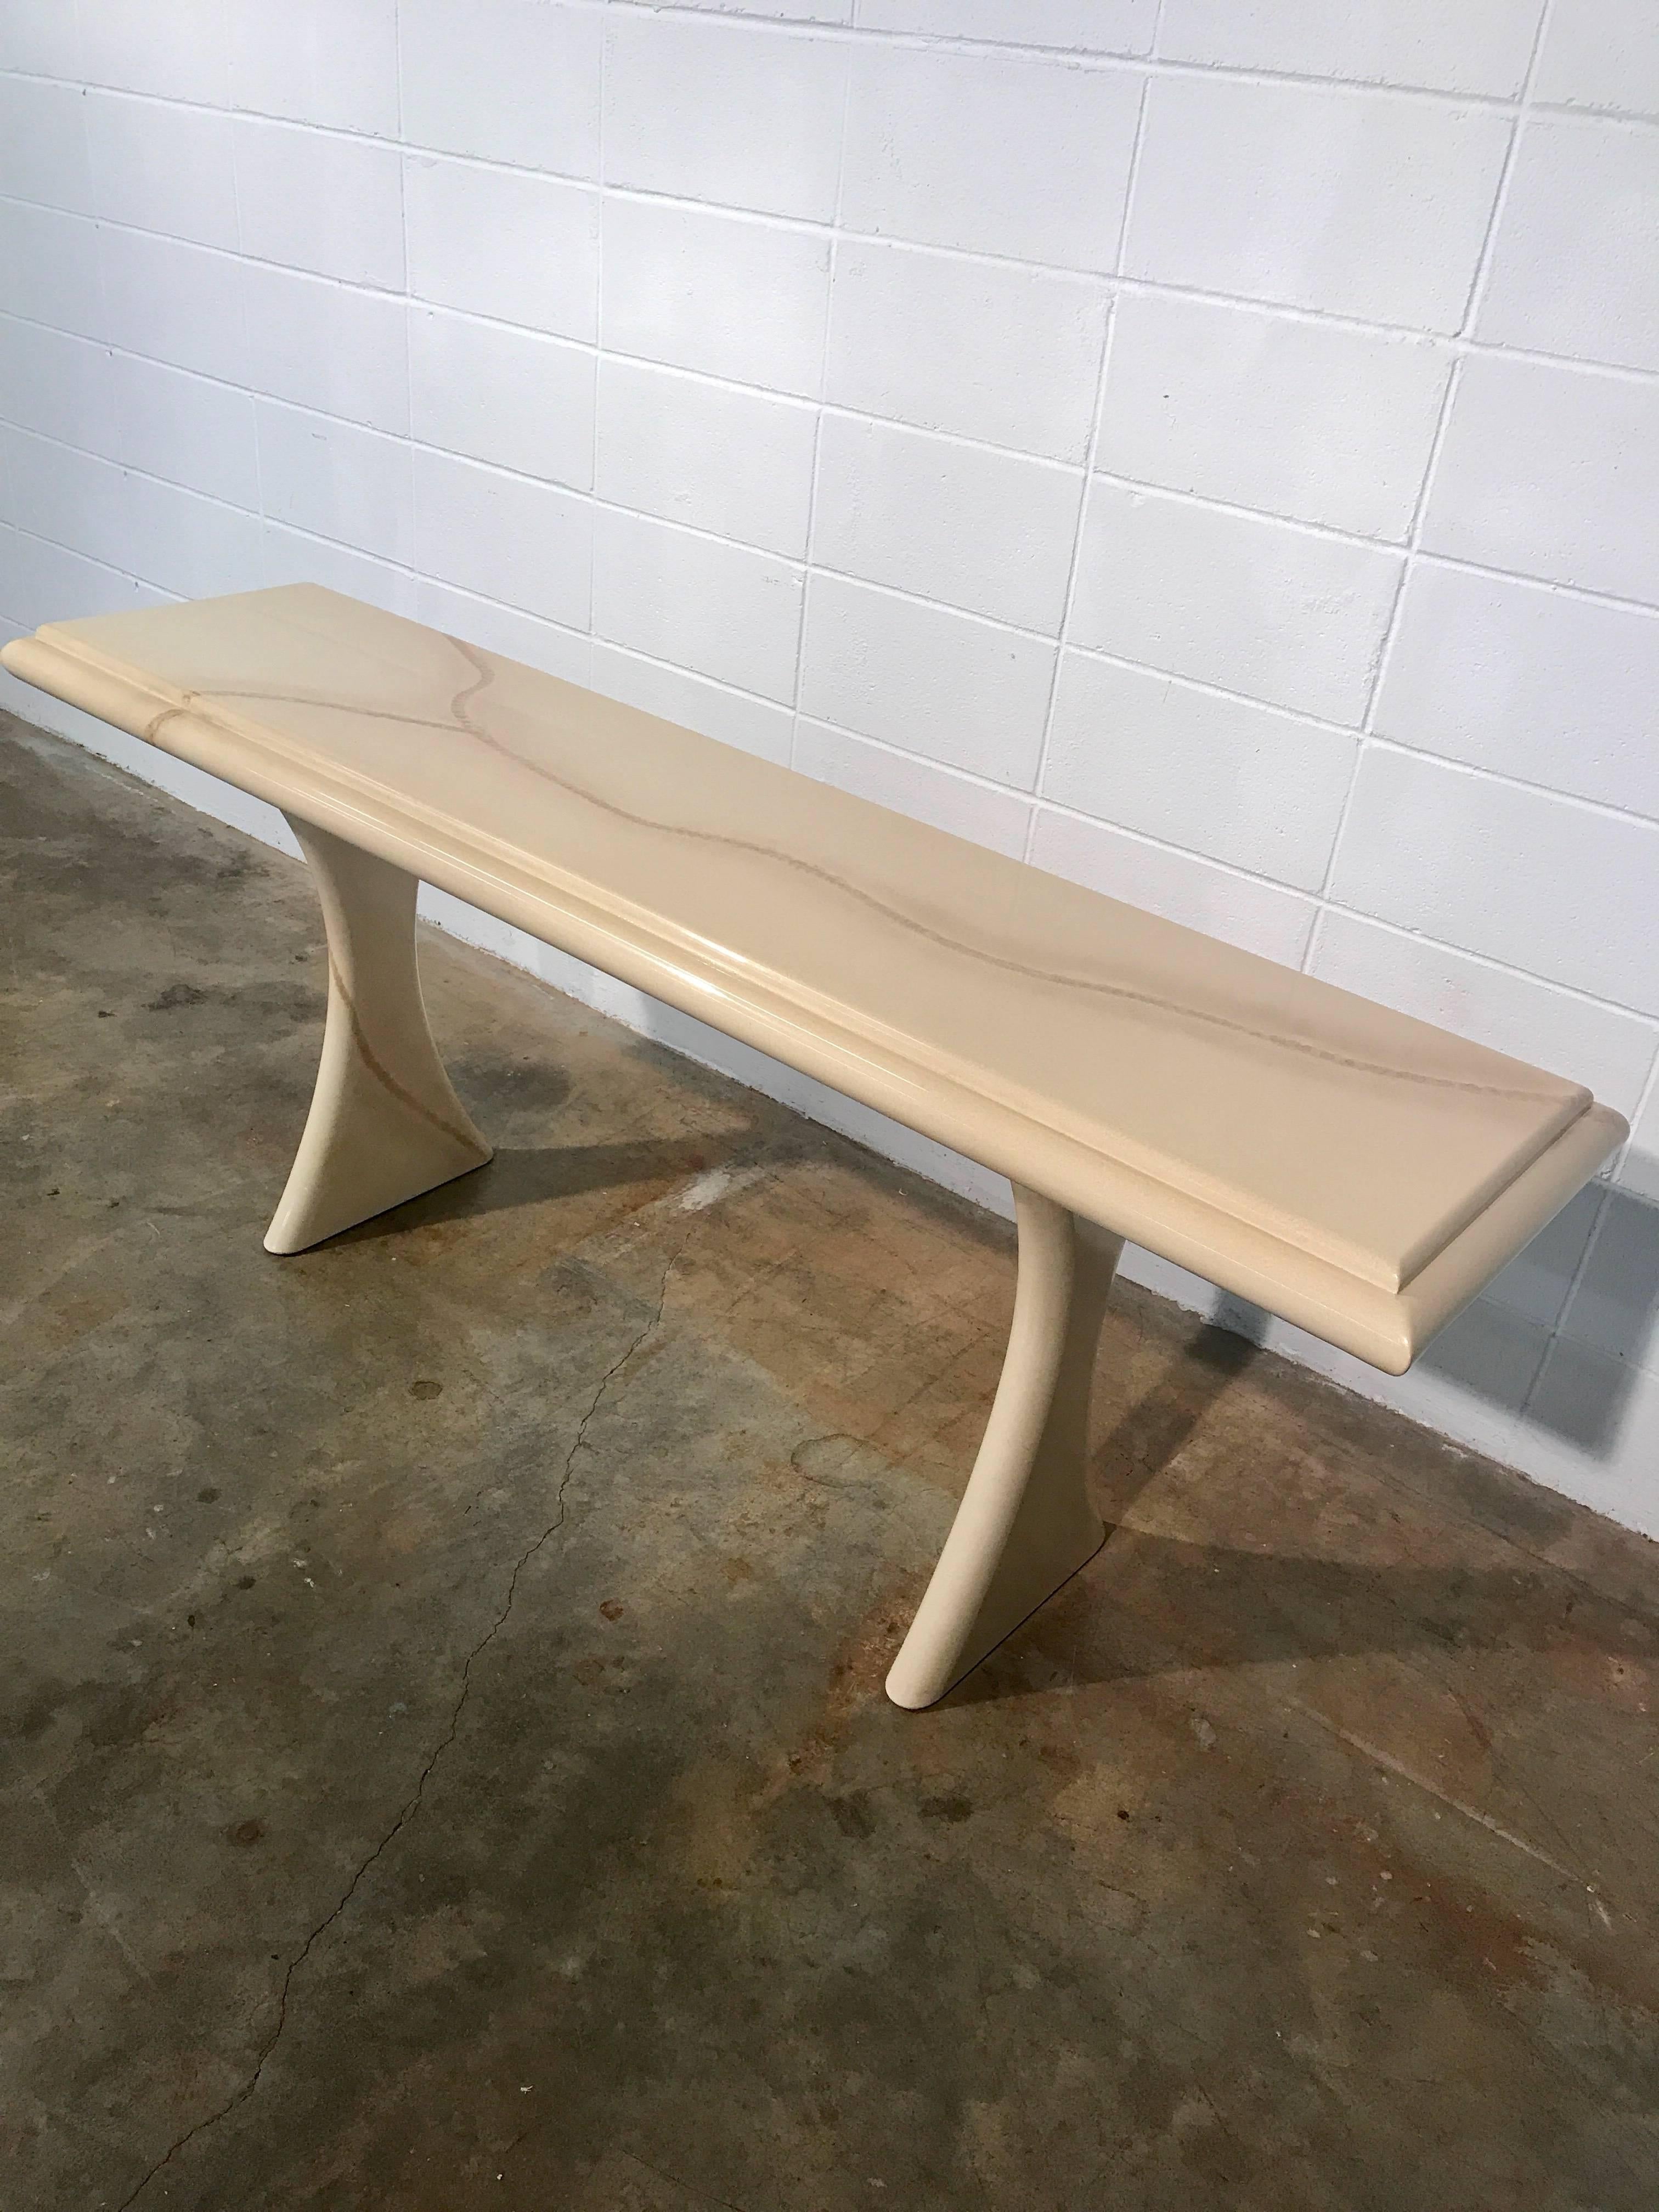 1970s faux parchment console table. Great original condition with very minimal imperfections in the finish. Nothing that detracts from overall aesthetics or value.
Clean and ready for use.